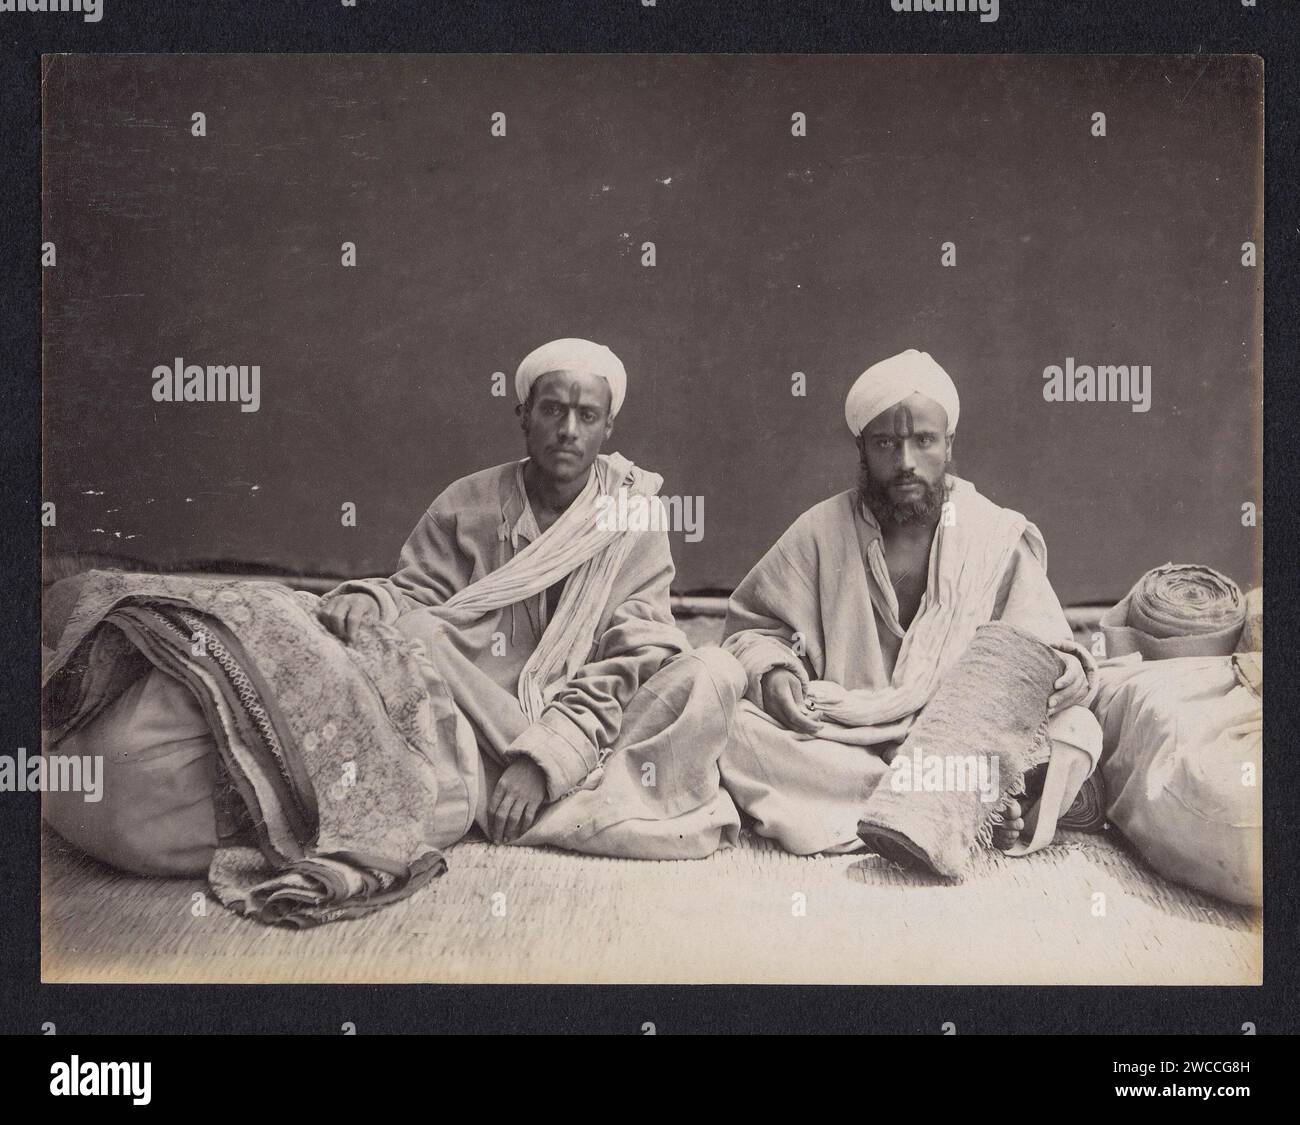 Studio portrait of two unknown Indian cloth merchants of Kashmir, anonymous, 1870 - 1890 photograph  Indiapublisher: Great Britain paper albumen print merchant, salesman. anonymous historical person portrayed British India Stock Photo